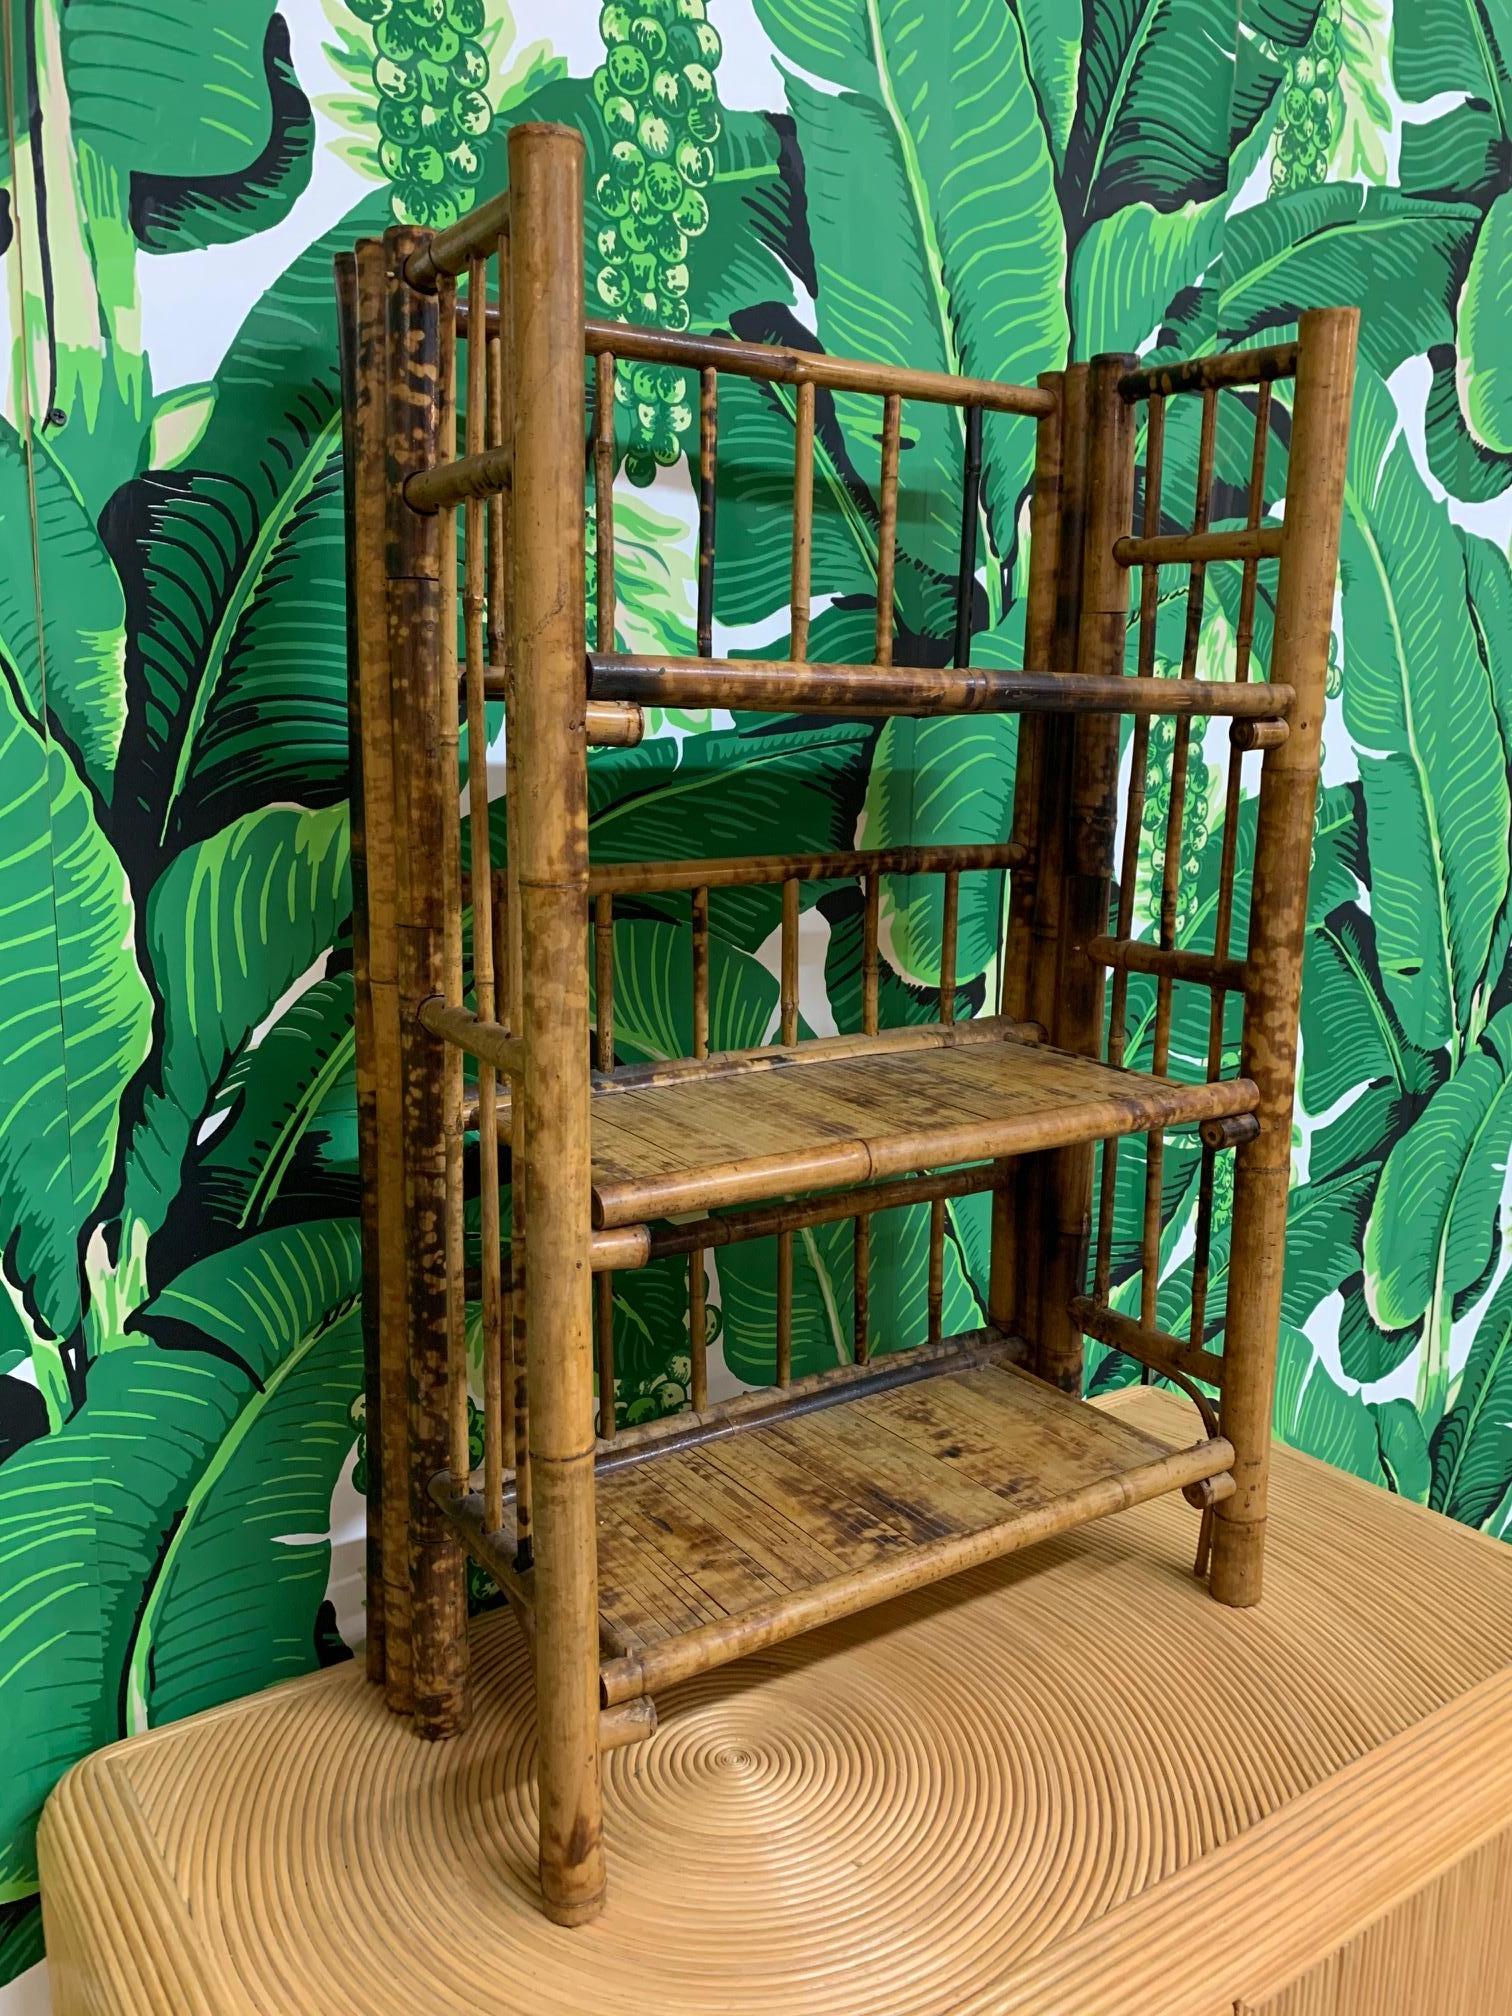 Vintage rattan and bamboo folding shelf mounts to the wall or can be used free standing. Very good condition with minor imperfections consistent with age.